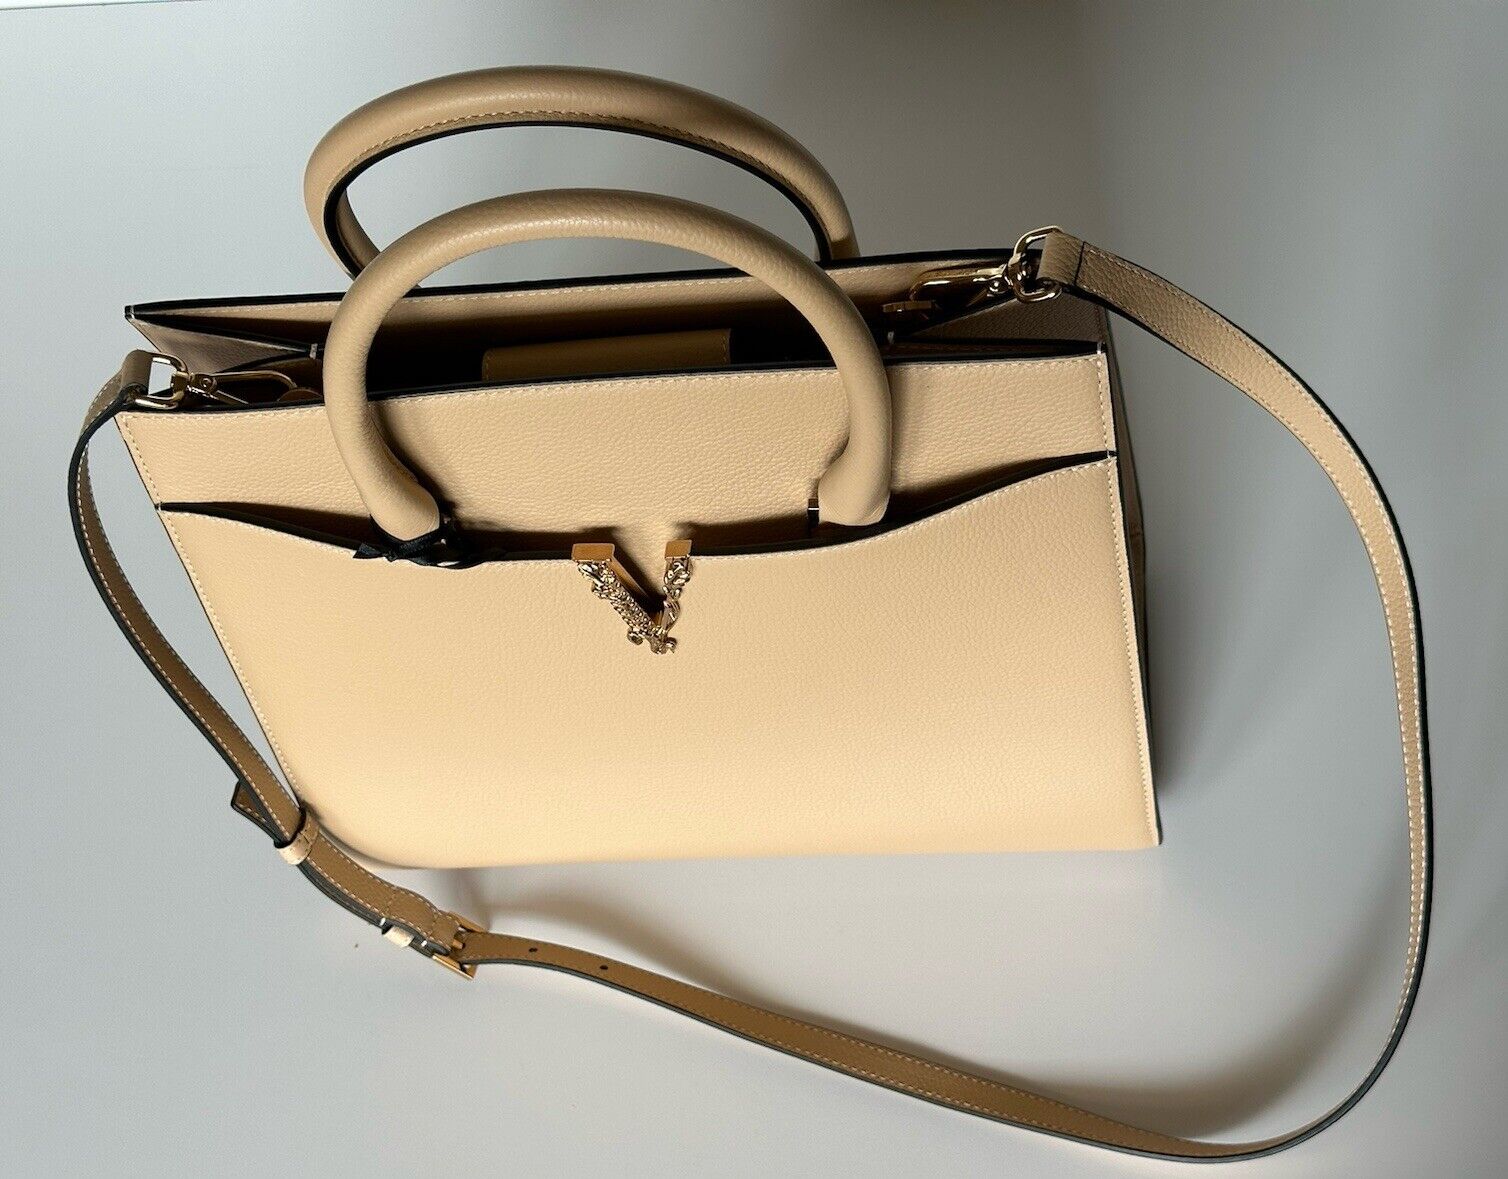 Versace Virtuous Grainy Calf Leather Beige Hand Bag with Strap 1005961 NWT $2100